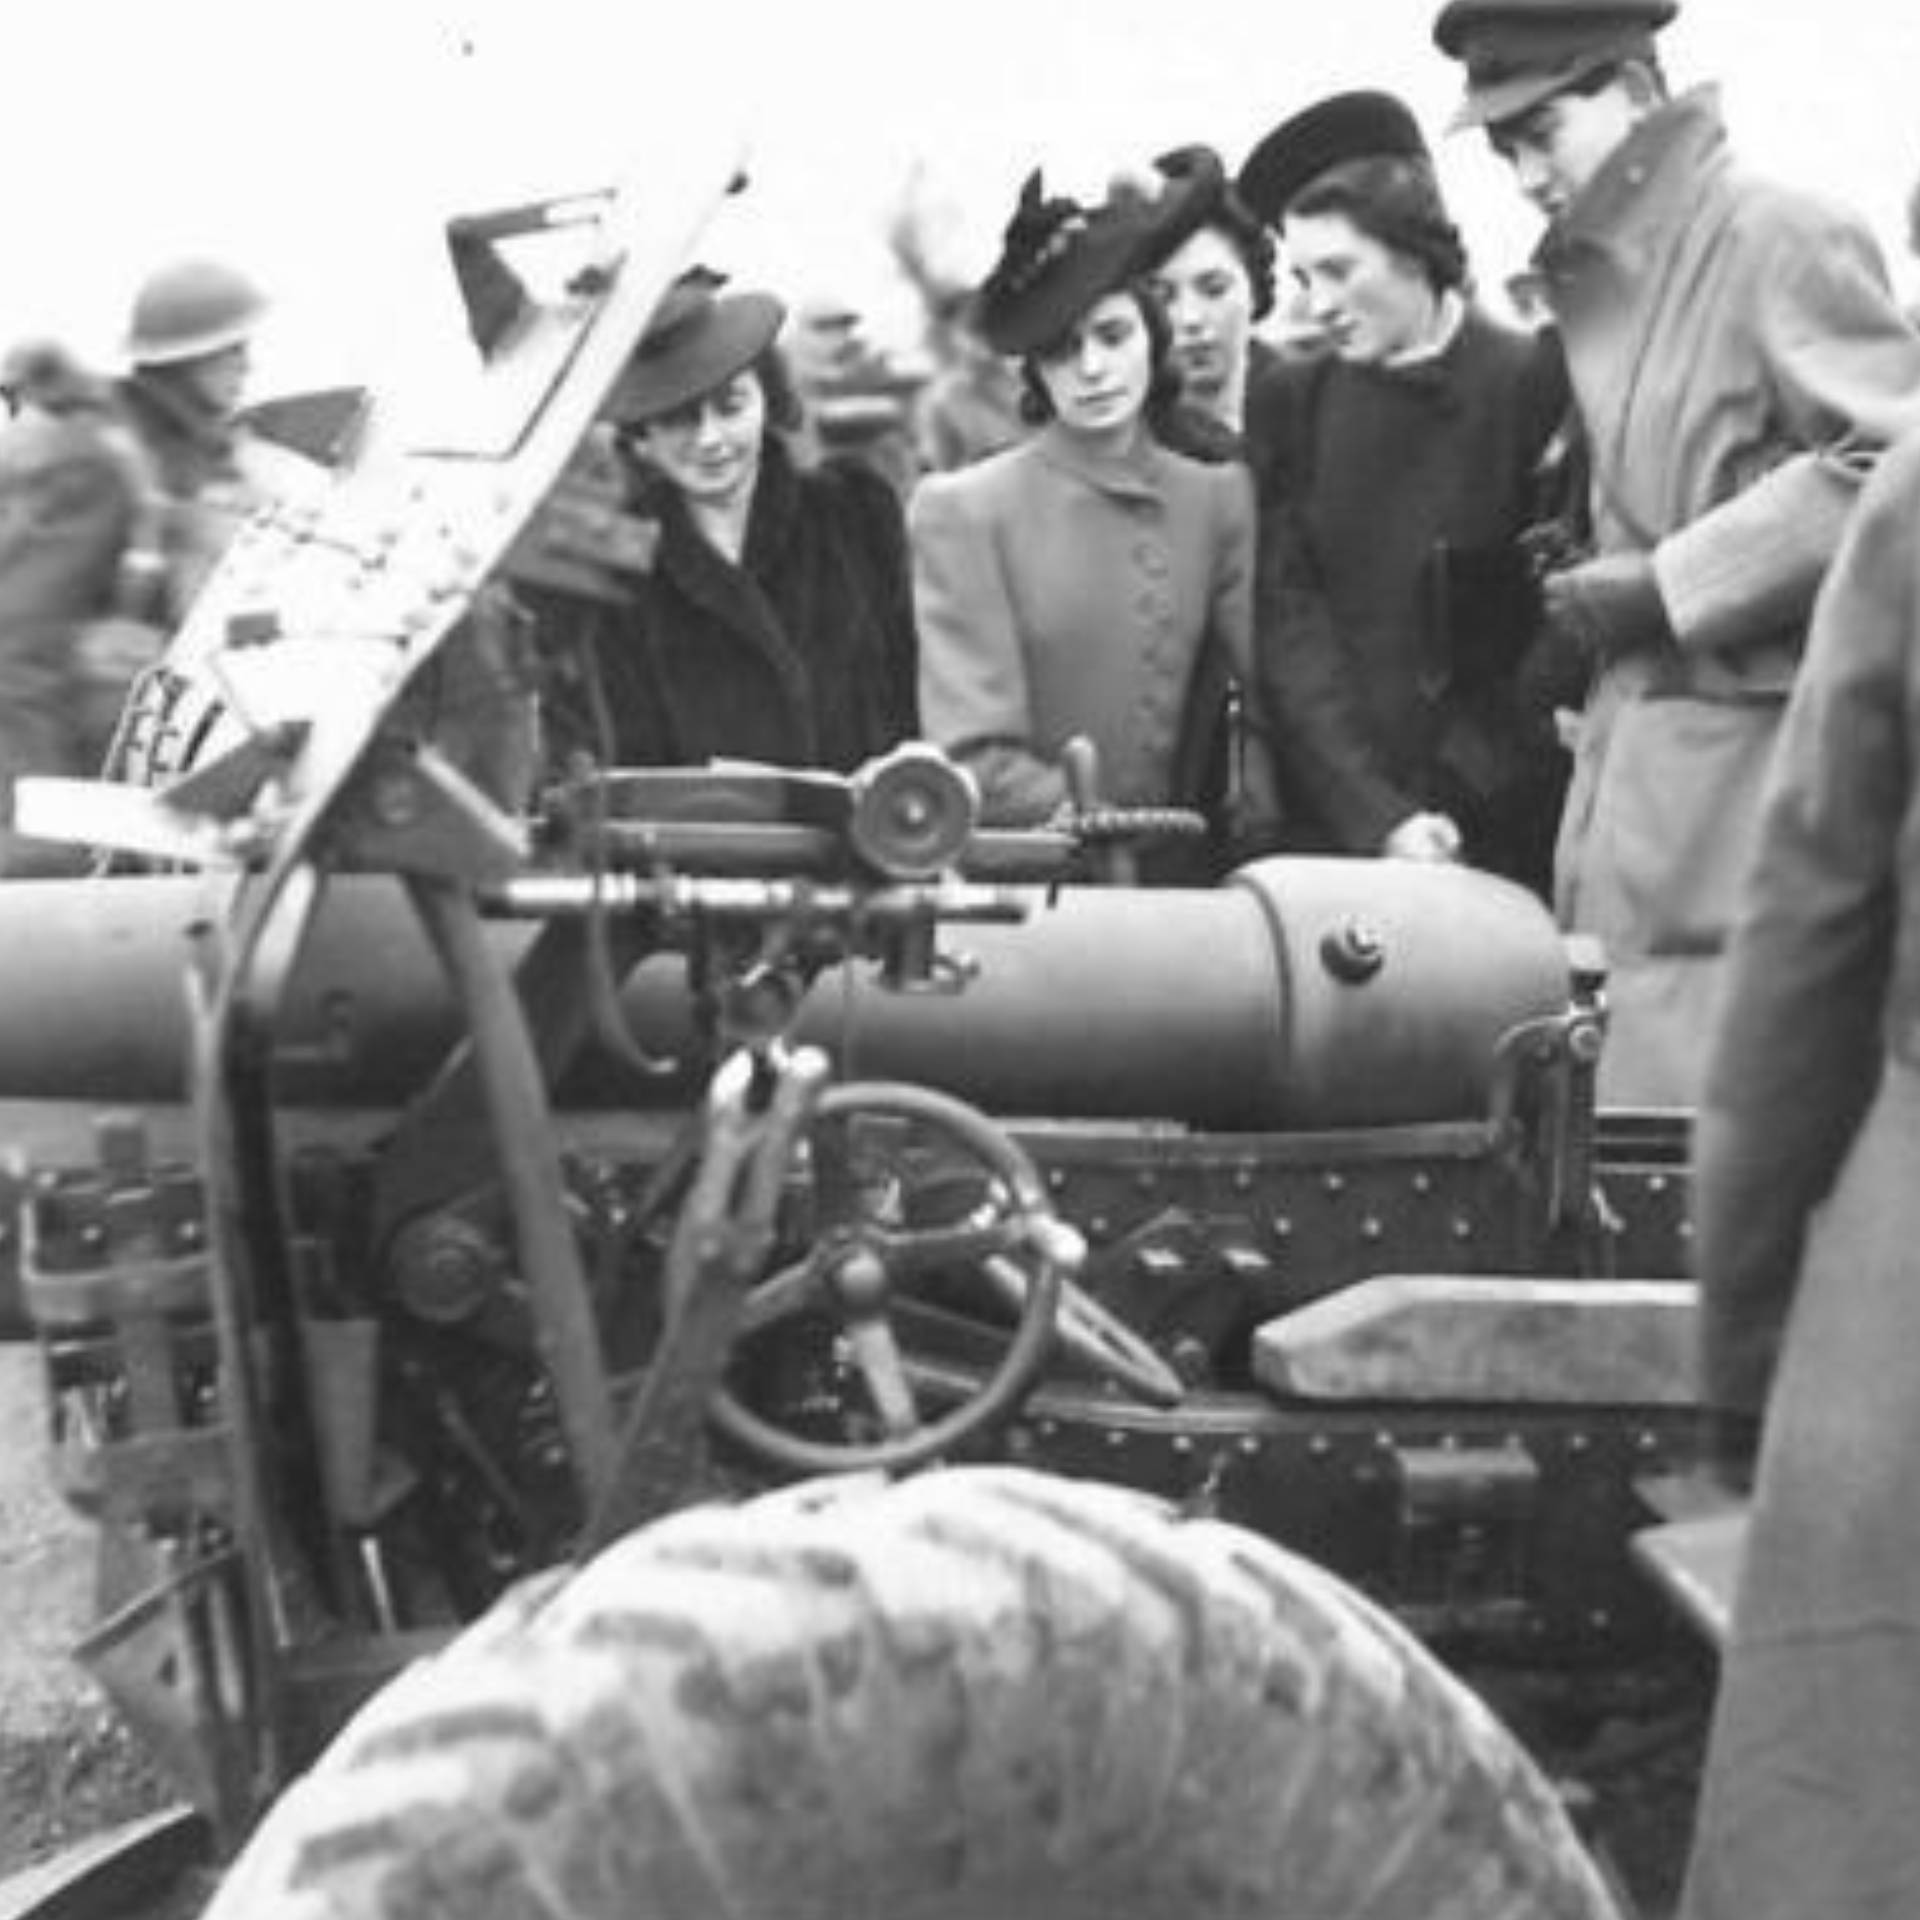 A 5th Divisional Artillery officer shows guns to a group of workers from a munitions factory in Northern Ireland.